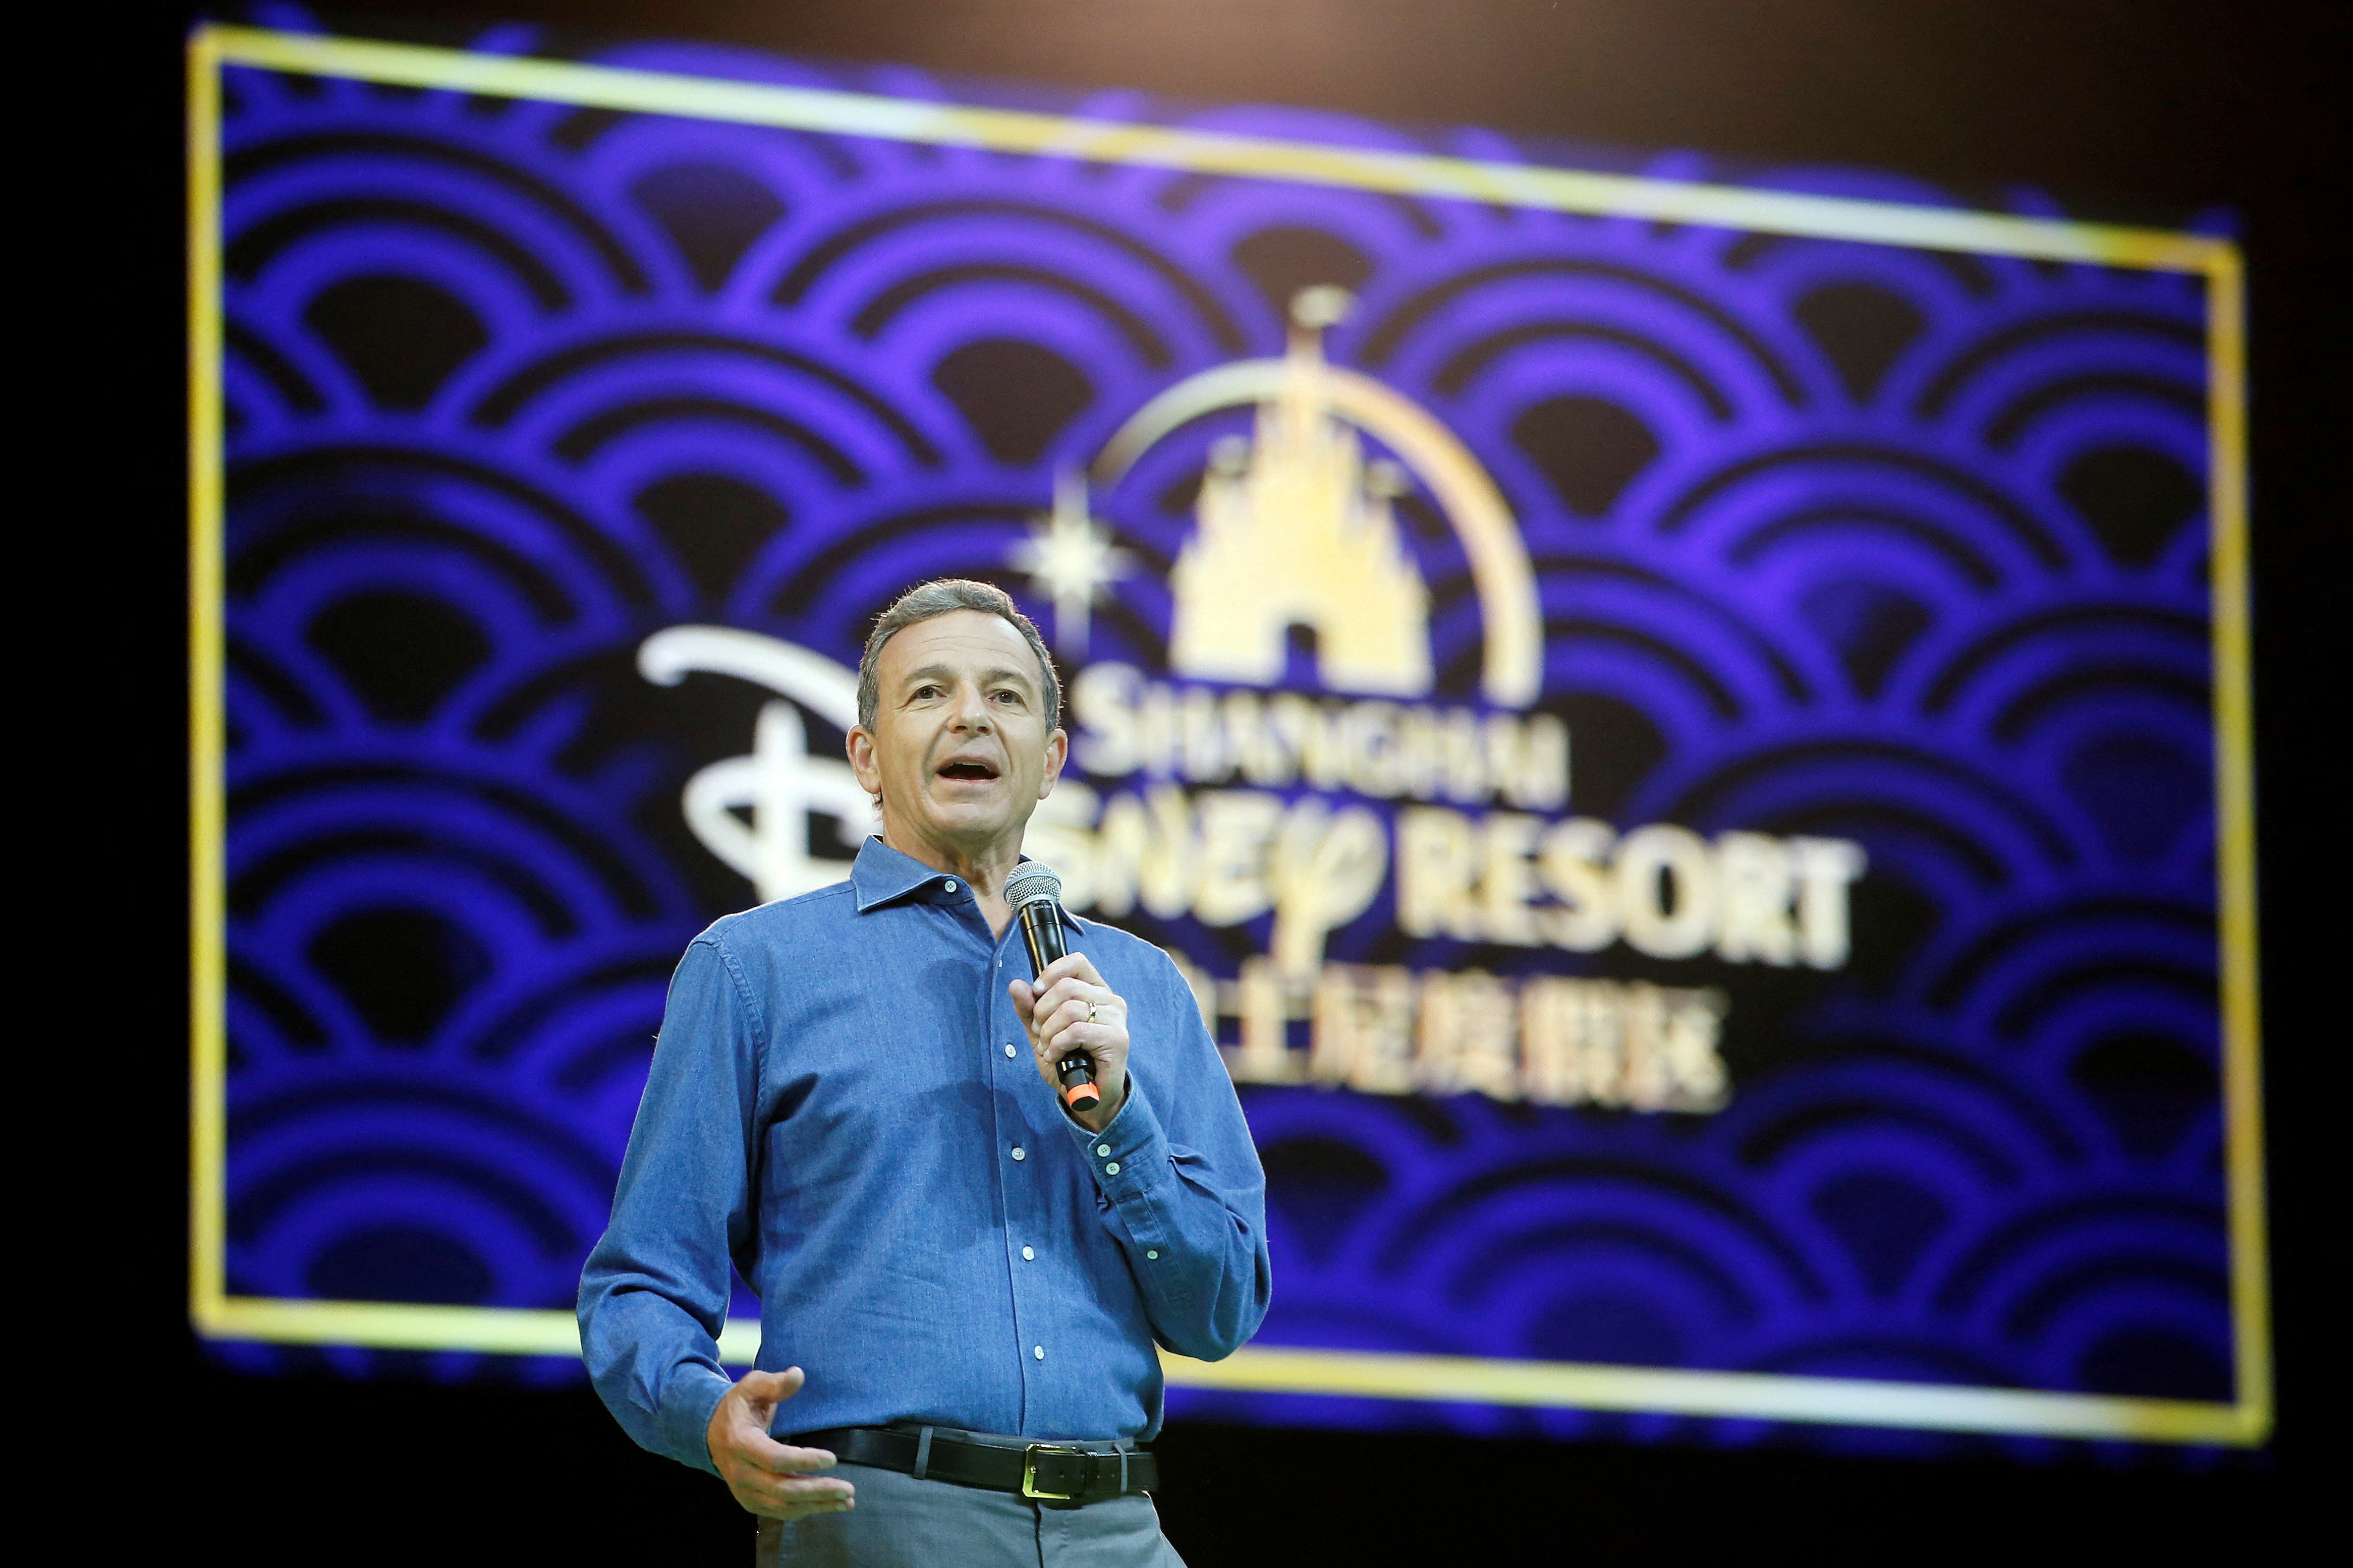 Disney's CEO Bob Iger holds a news conference at Shanghai Disney Resort as part of the three-day Grand Opening events in Shanghai